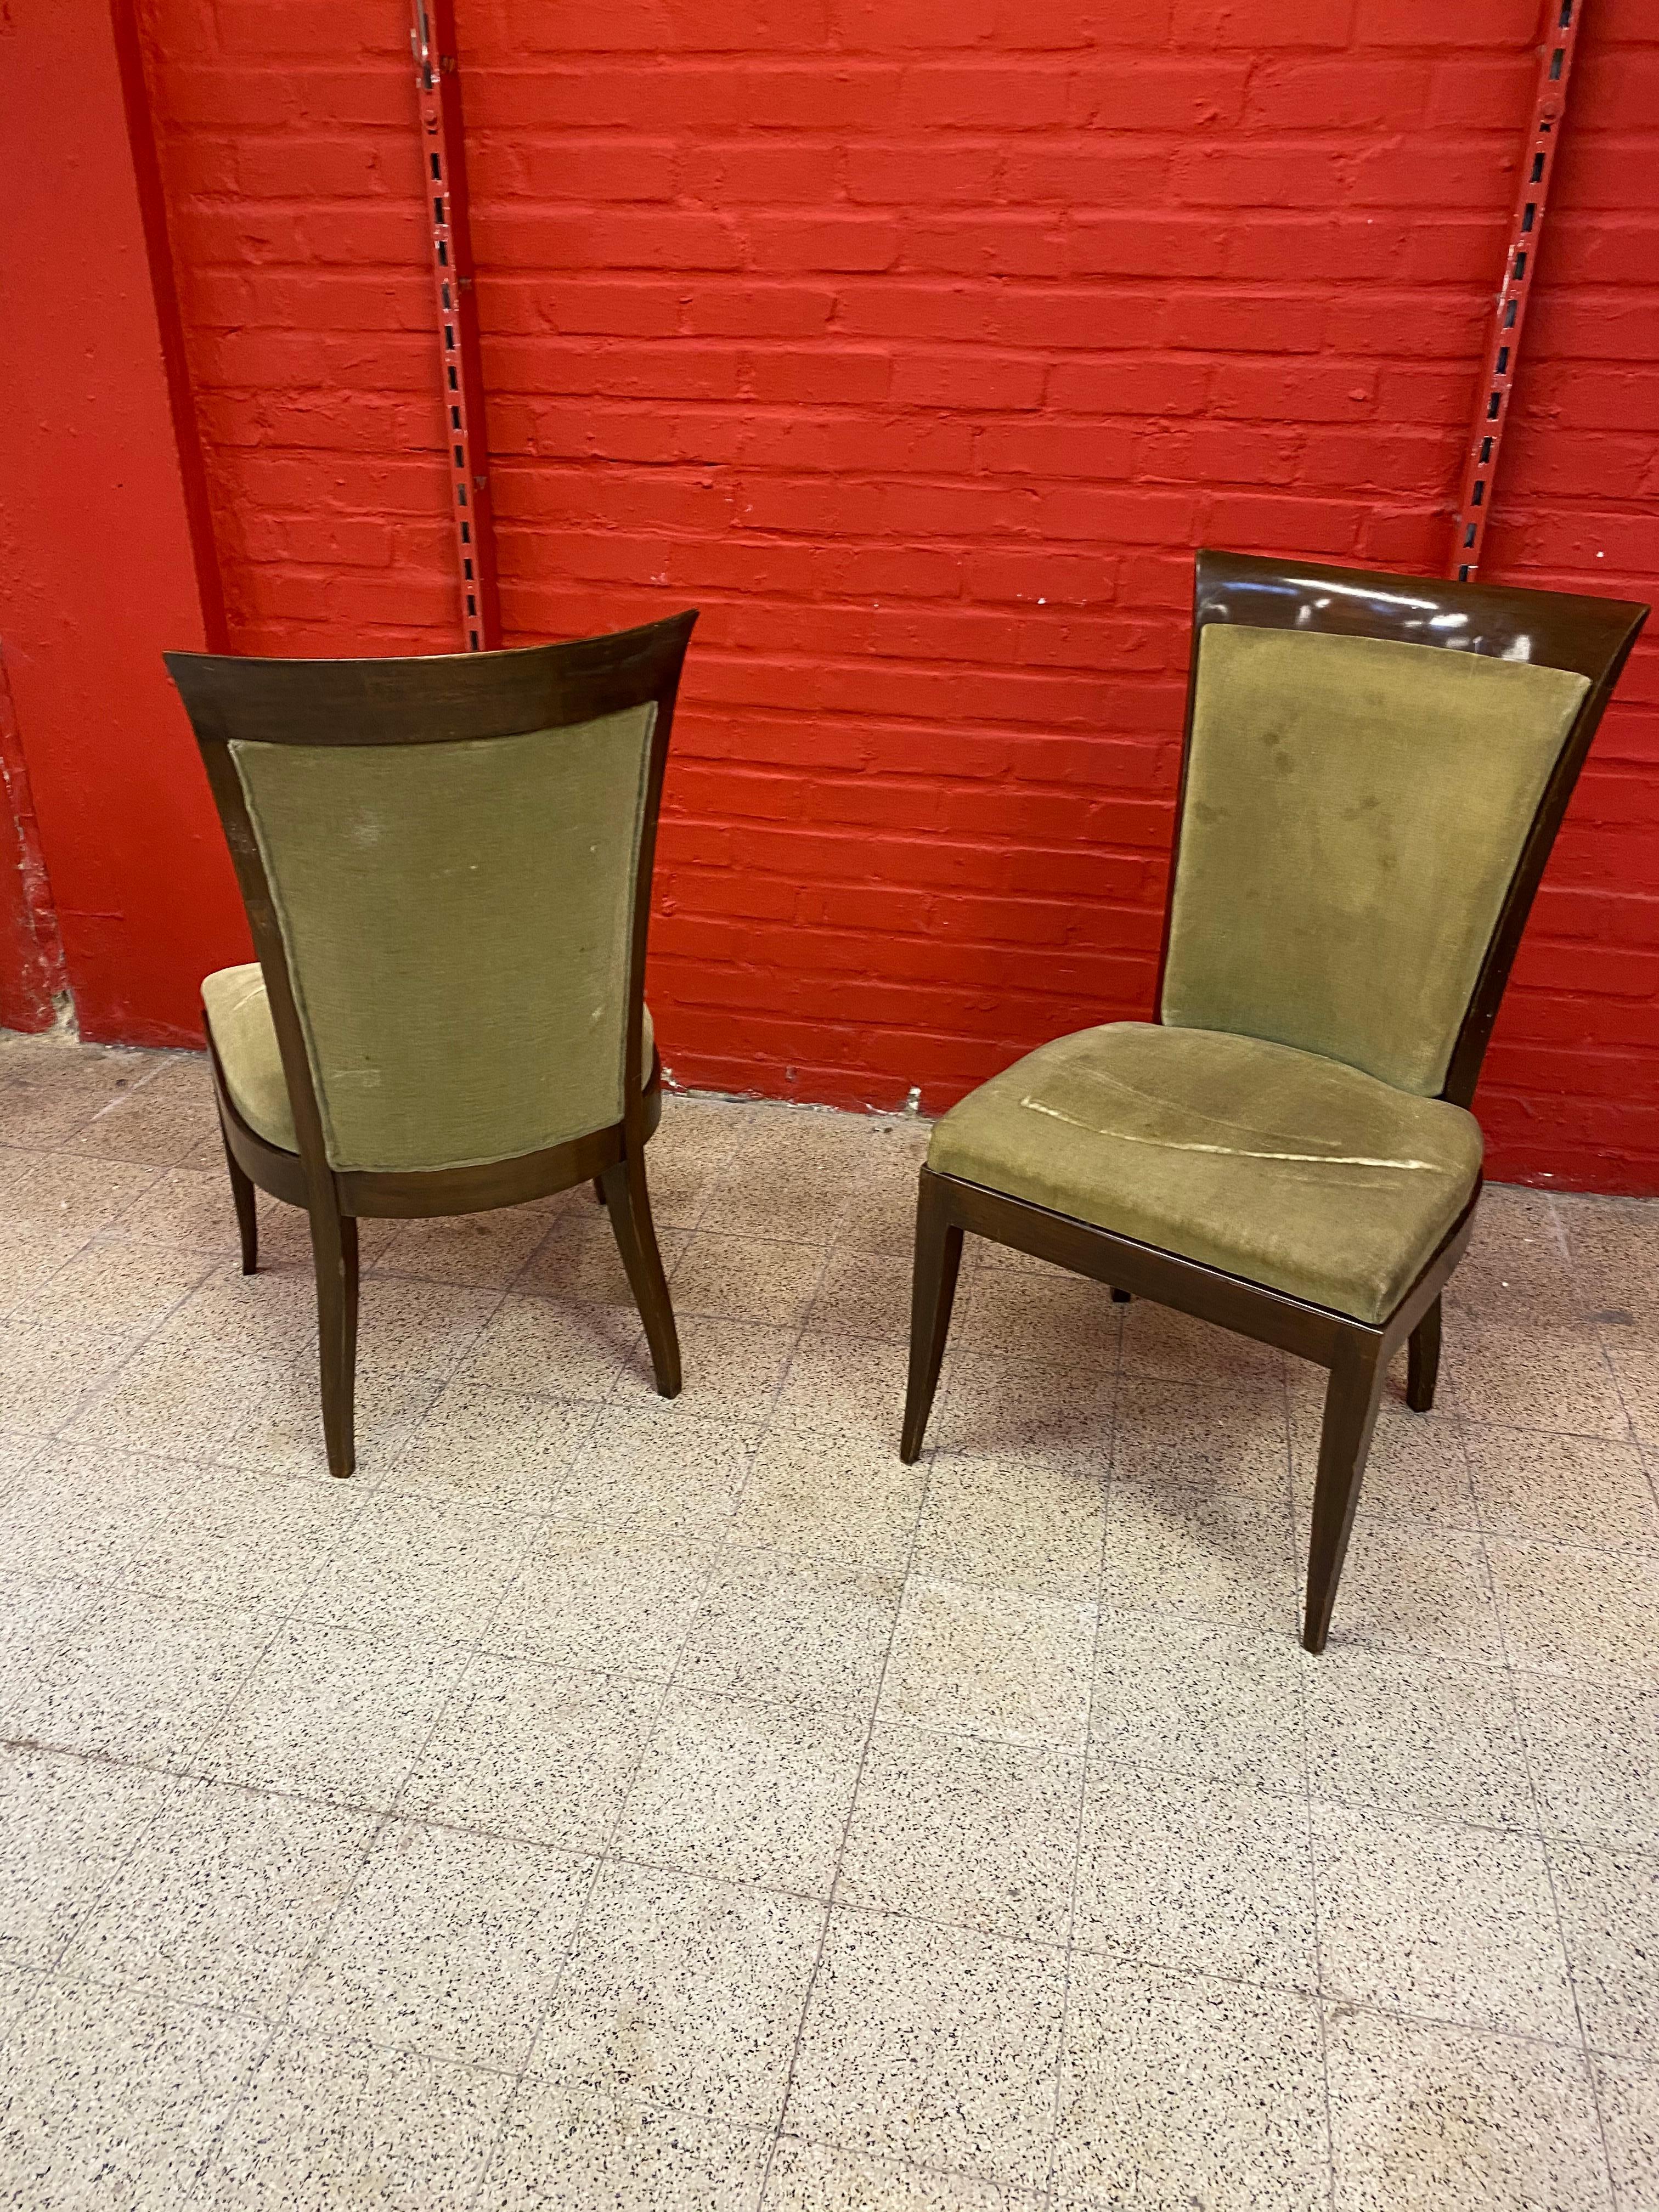 De Coene, 3 Large Art Deco Chairs in Solid Mahogany and Velvet, circa 1930 For Sale 2